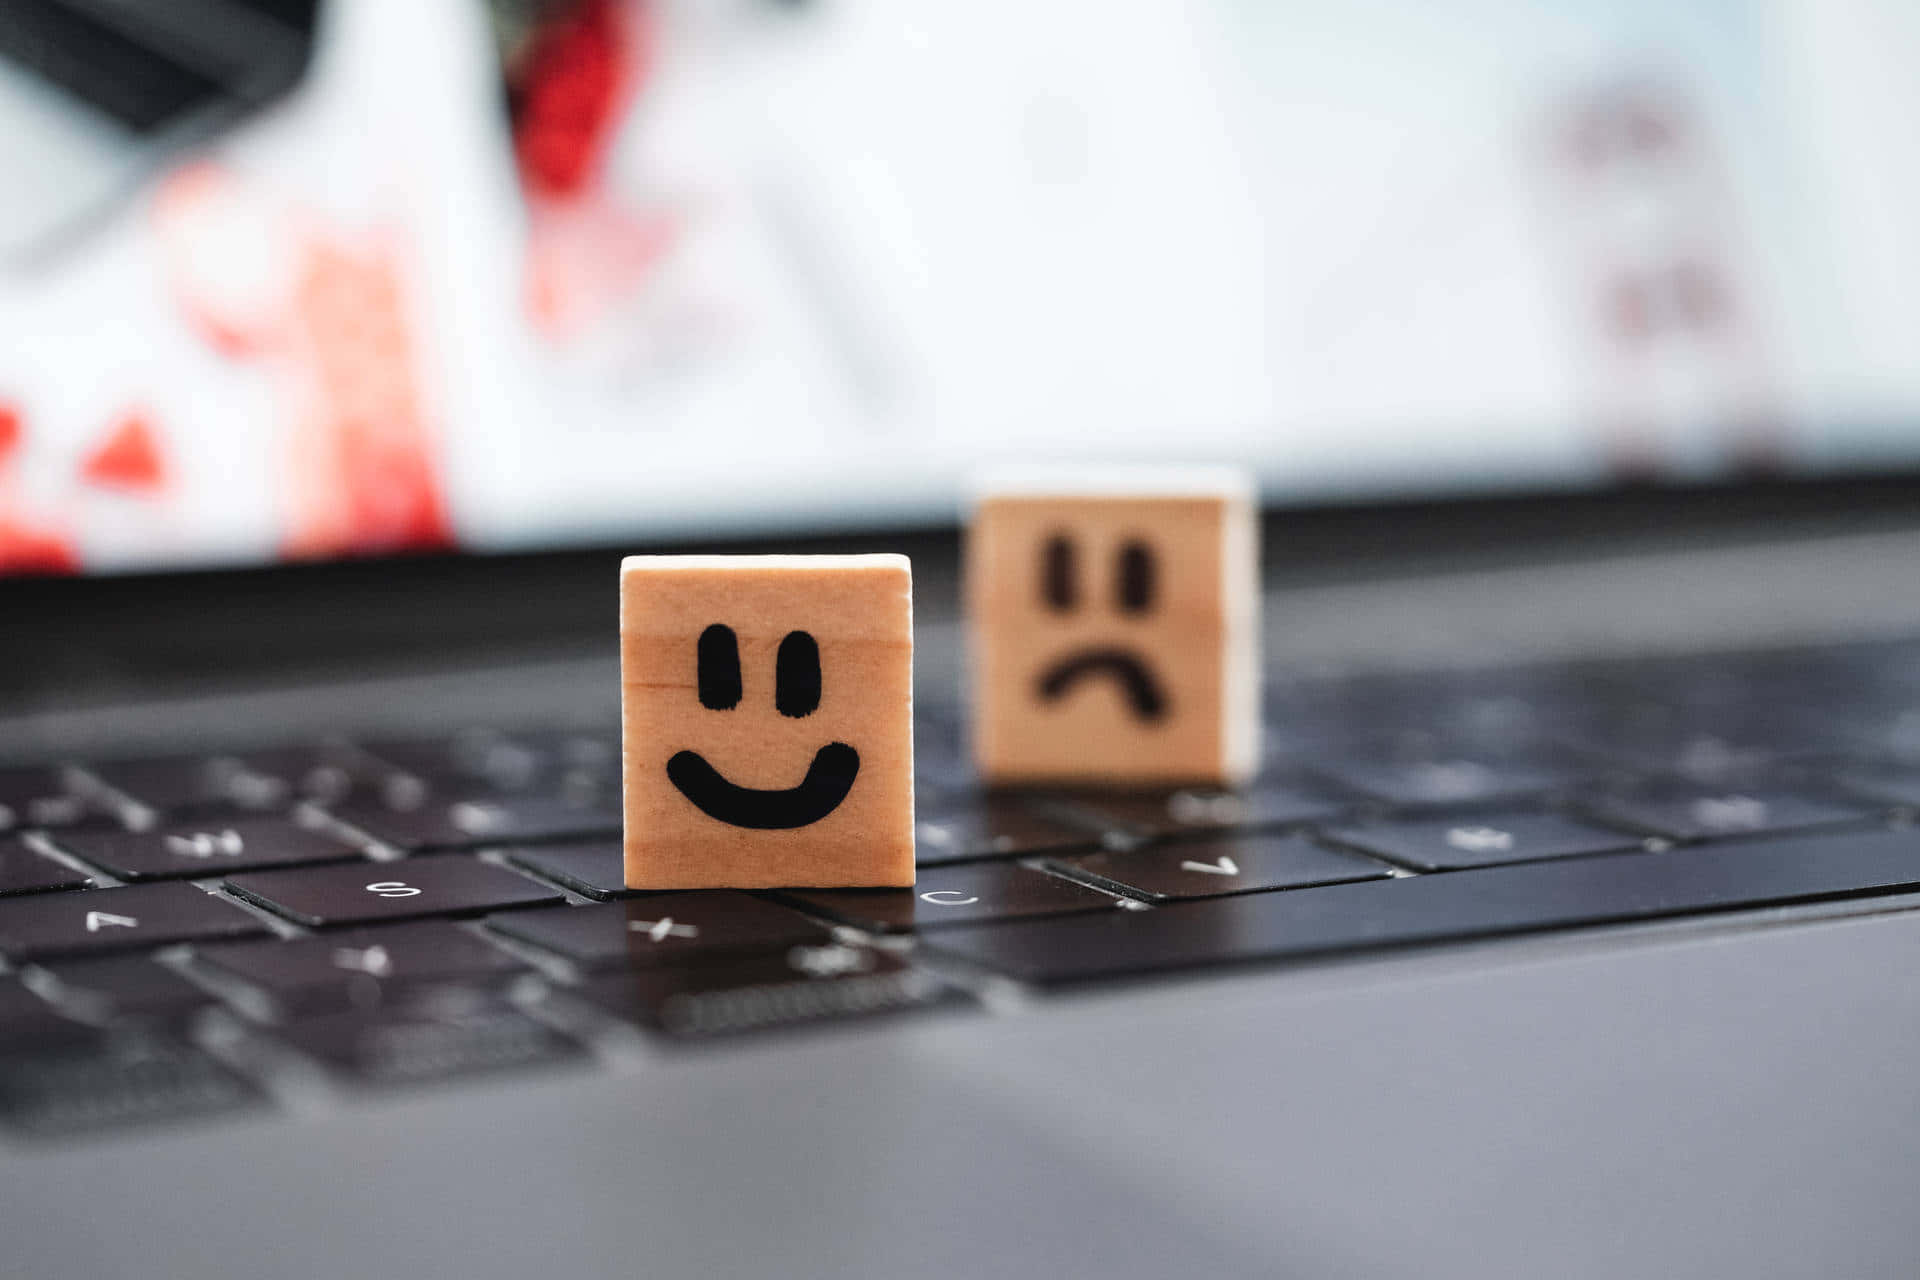 Two Wooden Blocks With Smiley Faces On A Laptop Keyboard